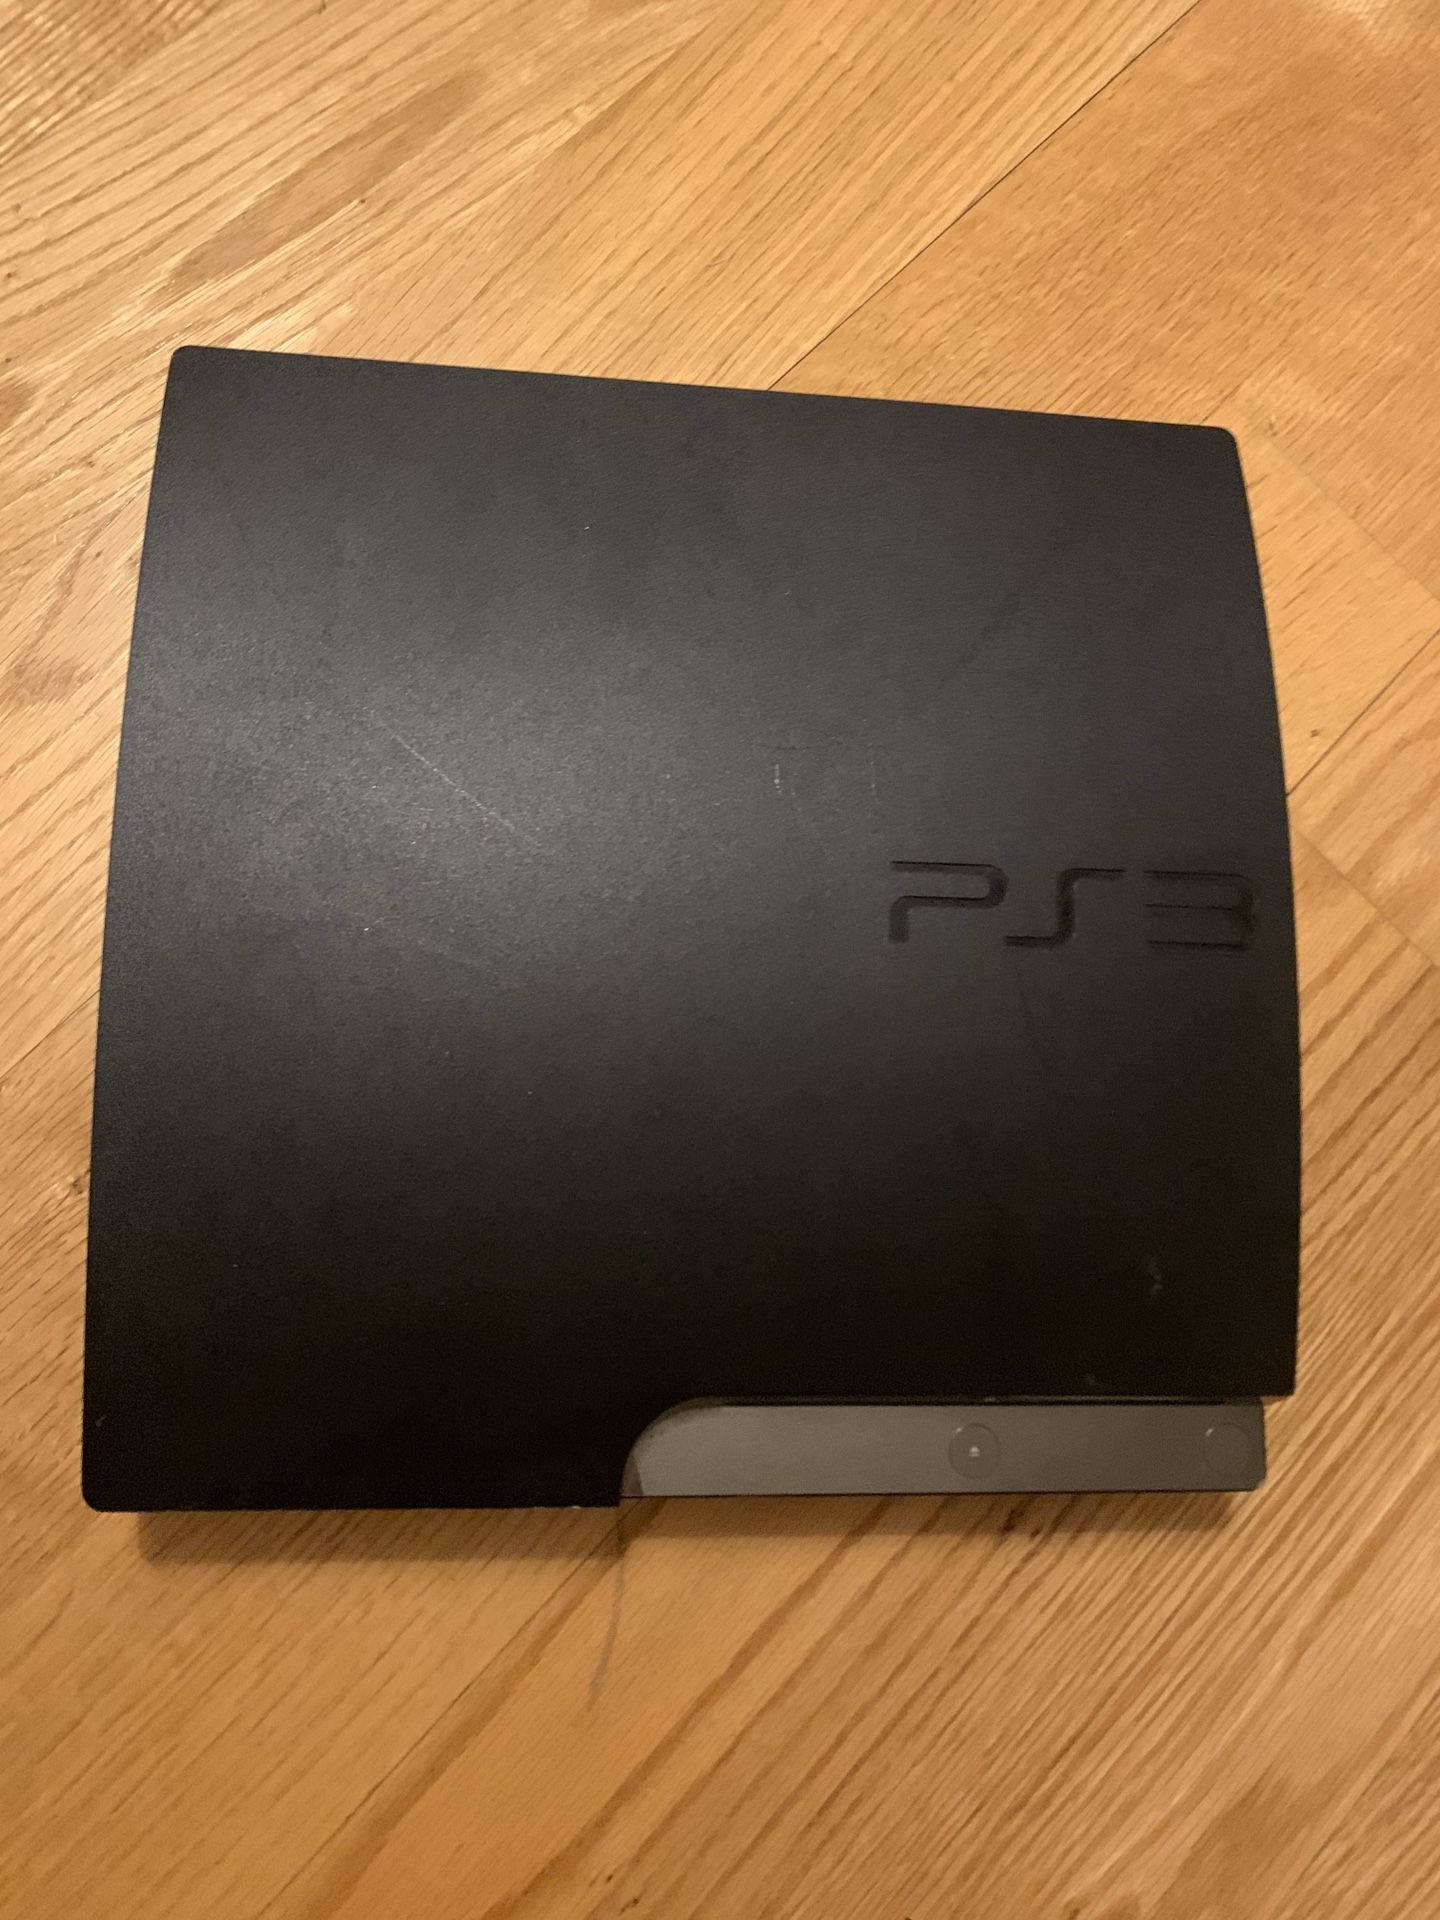 PlayStation PS3 System